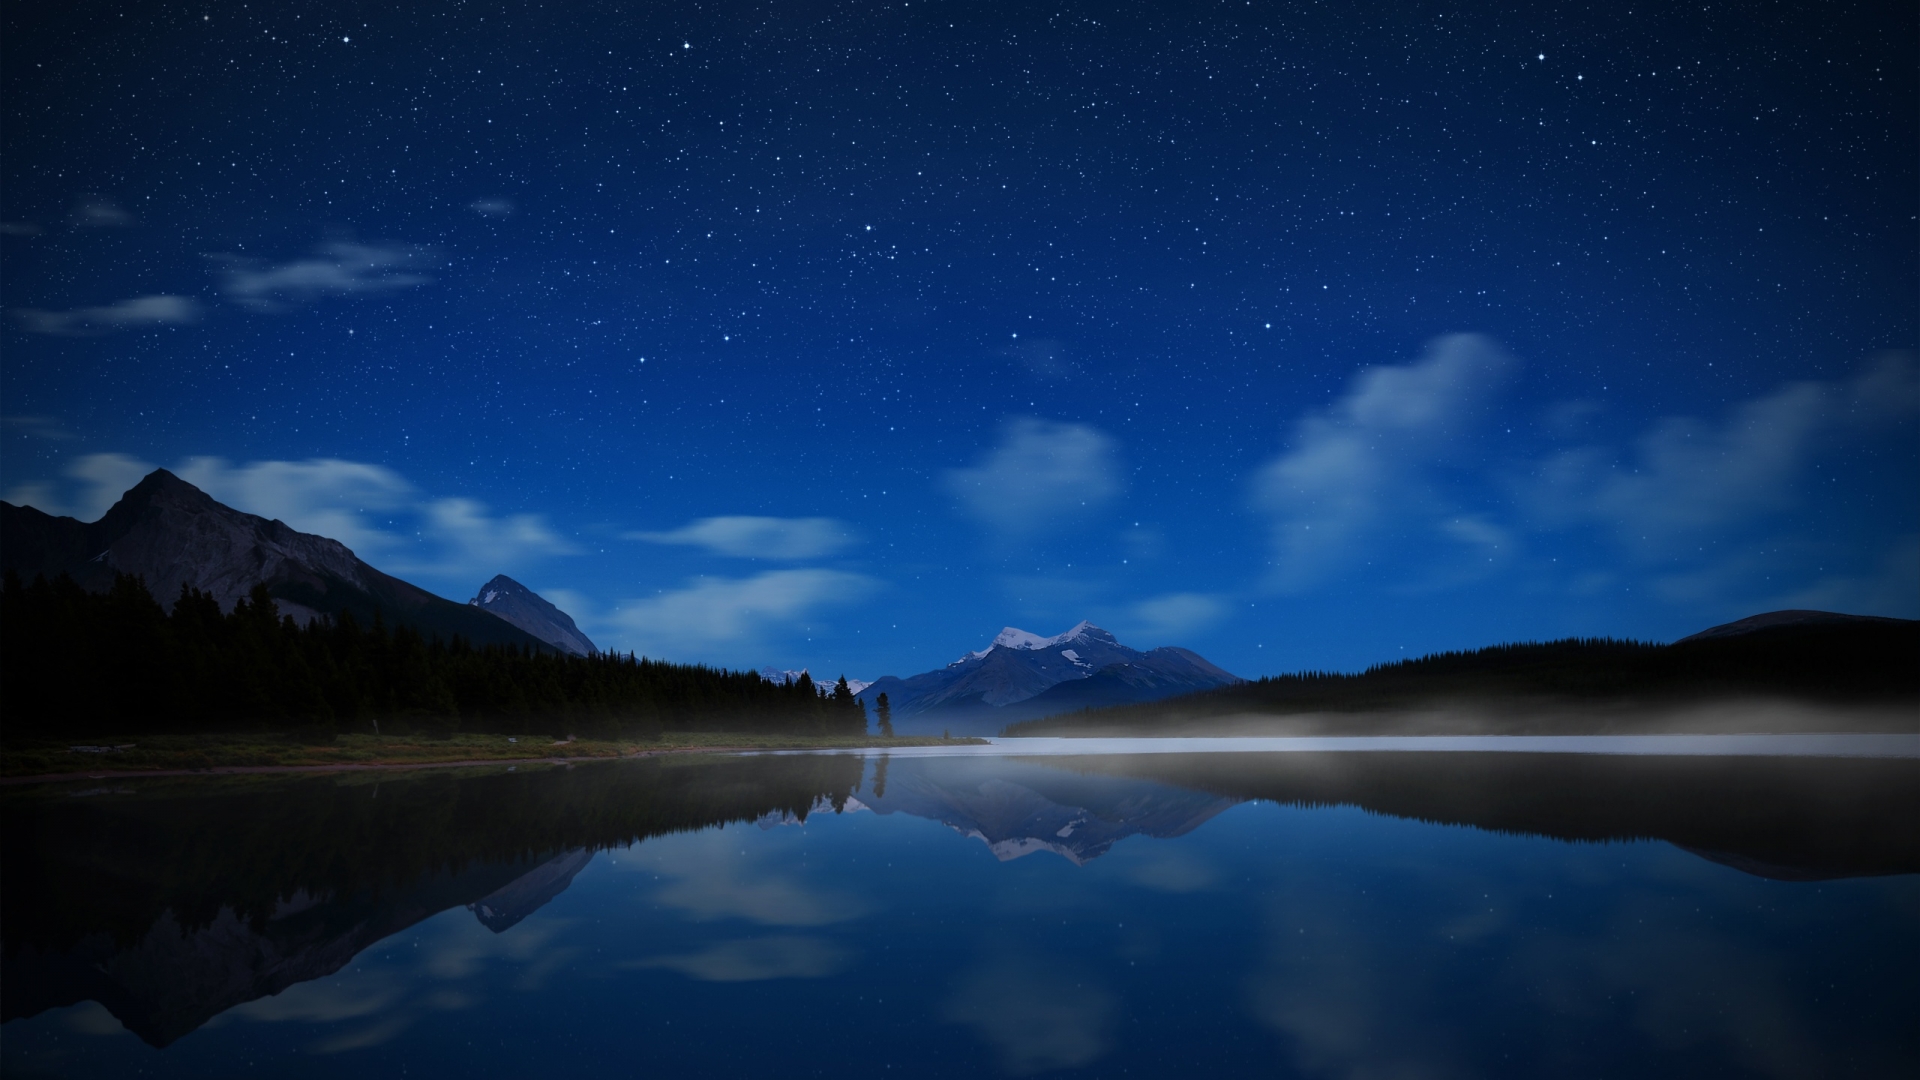 starry sky wallpaper hd,sky,reflection,nature,blue,water